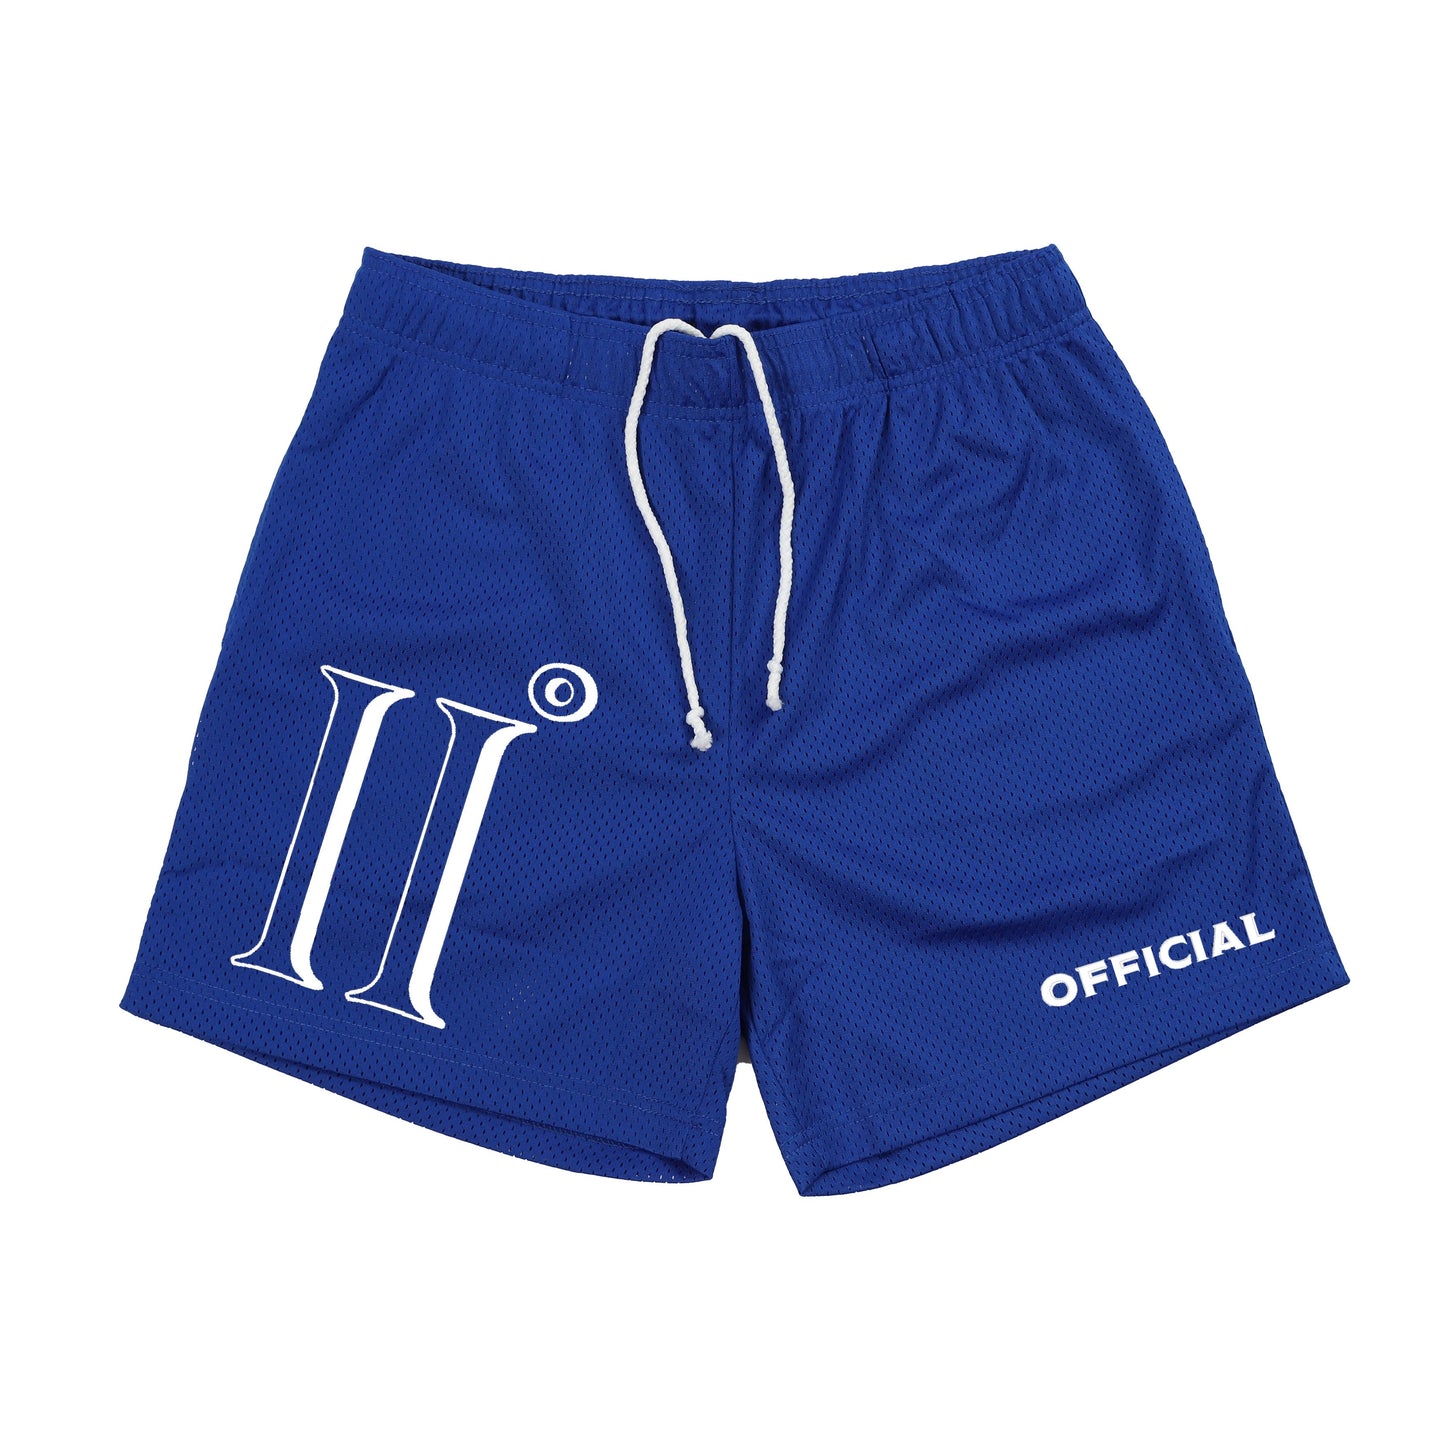 II Degrees Official Shorts